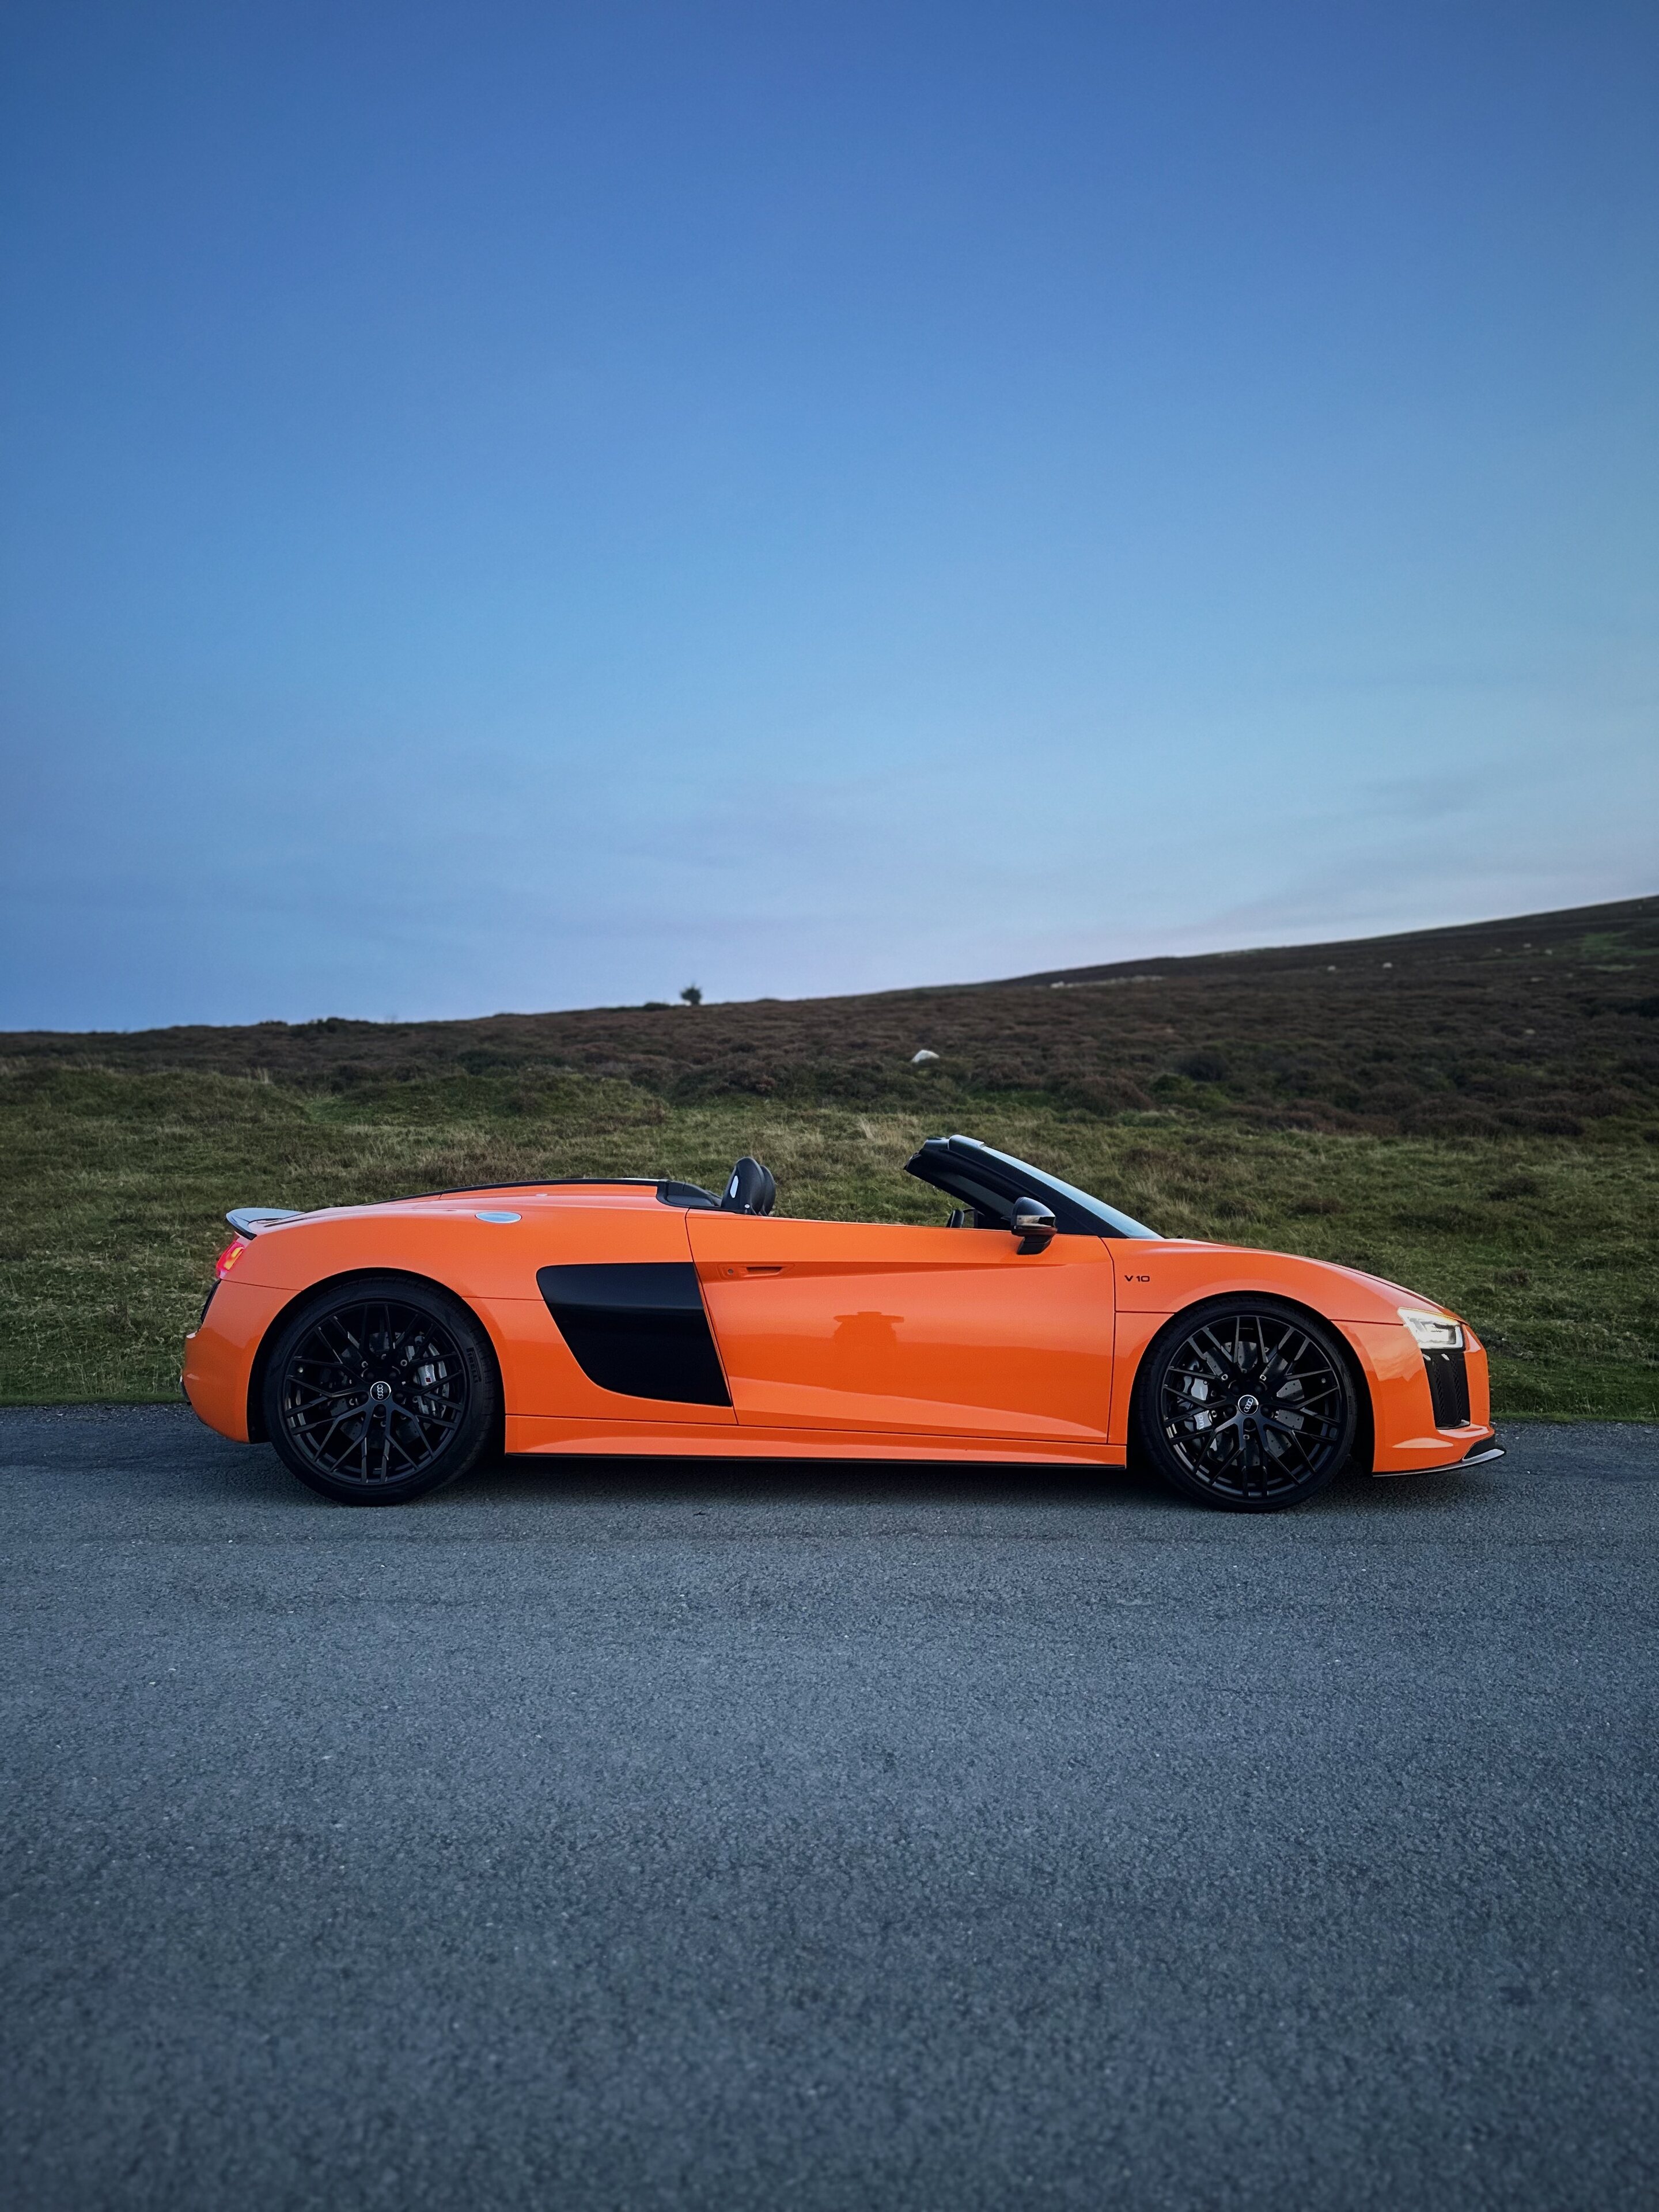 Orange Audi R8 V10 Plus Spyder  - Page 2 - Readers' Cars - PistonHeads UK - This image captures a scene on a road at dusk. A vibrant orange sports car, possibly an Audi RS or similar, is parked on the side of the road. The car's sleek design and striking color make it stand out against the natural backdrop of a hillside. There are no people visible in the image. The sky above is painted with hues of blue, suggesting that the photo was taken either early in the morning or late in the afternoon. The setting sun casts a warm glow on the scene, adding to its serene ambiance.